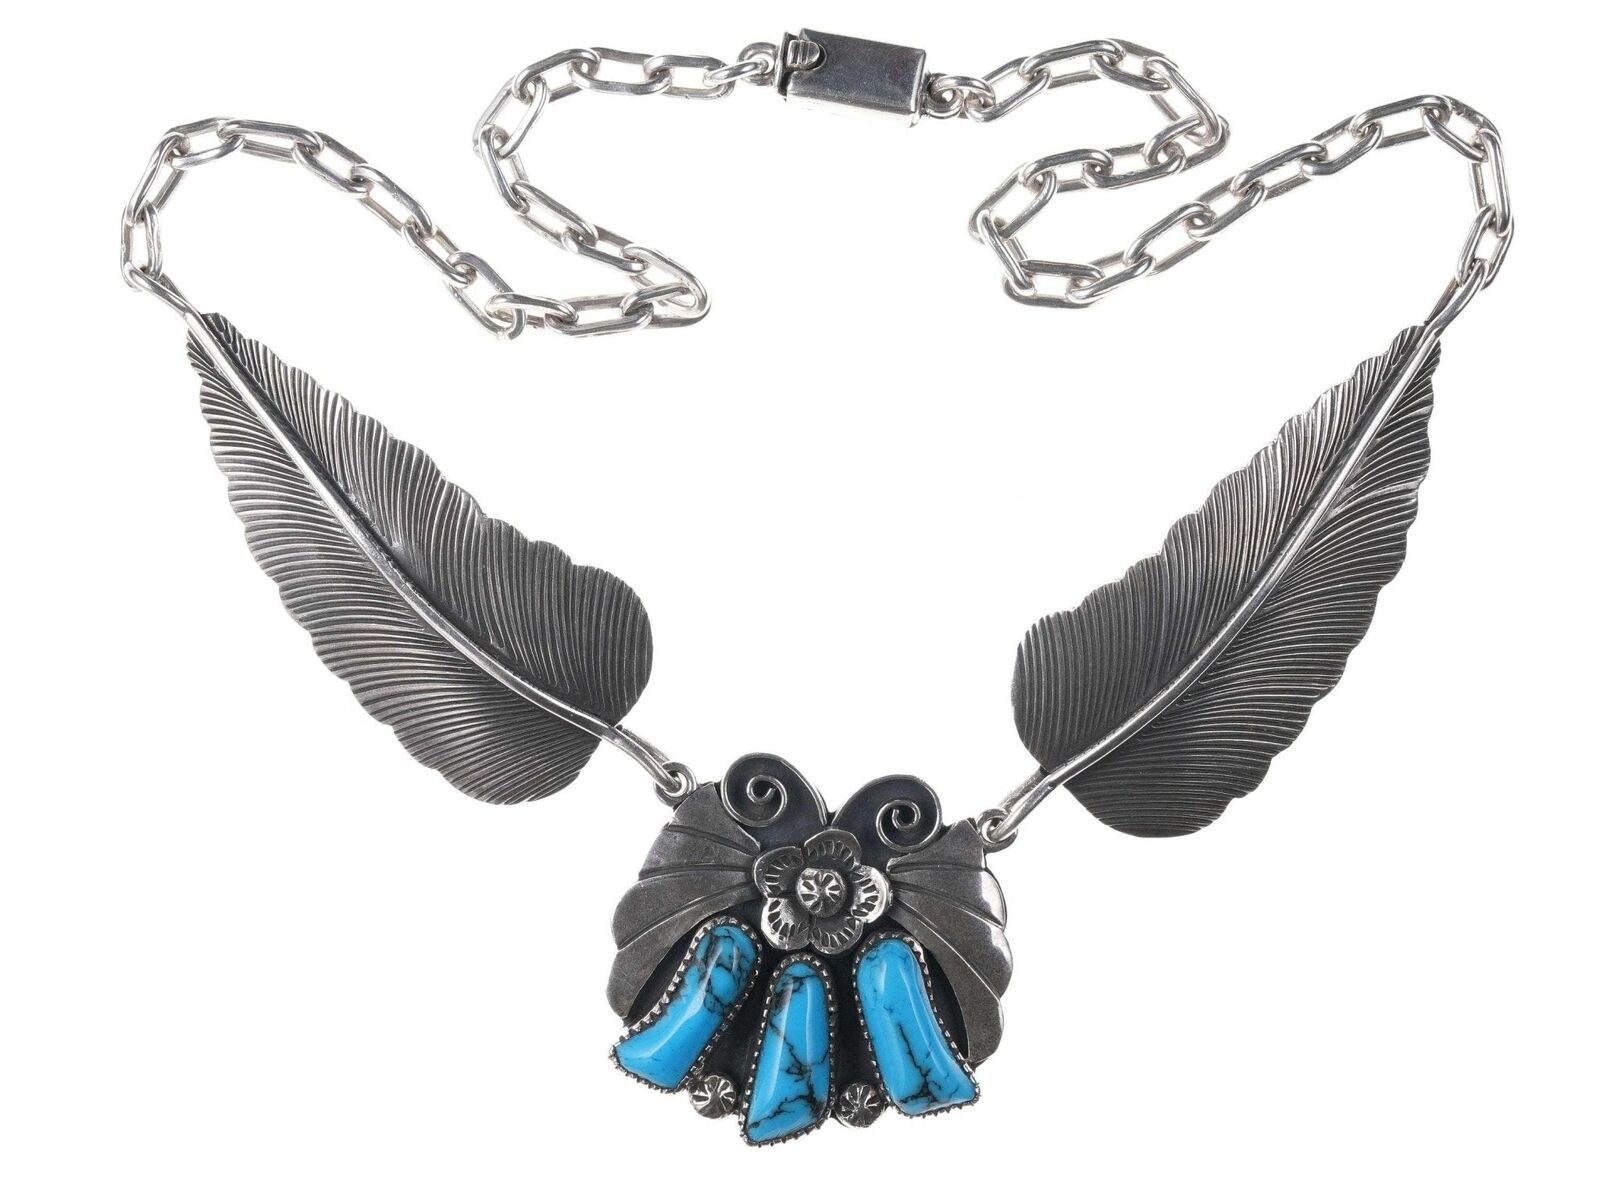 Large Southwestern Sterling/howlite Feather pendant necklace.